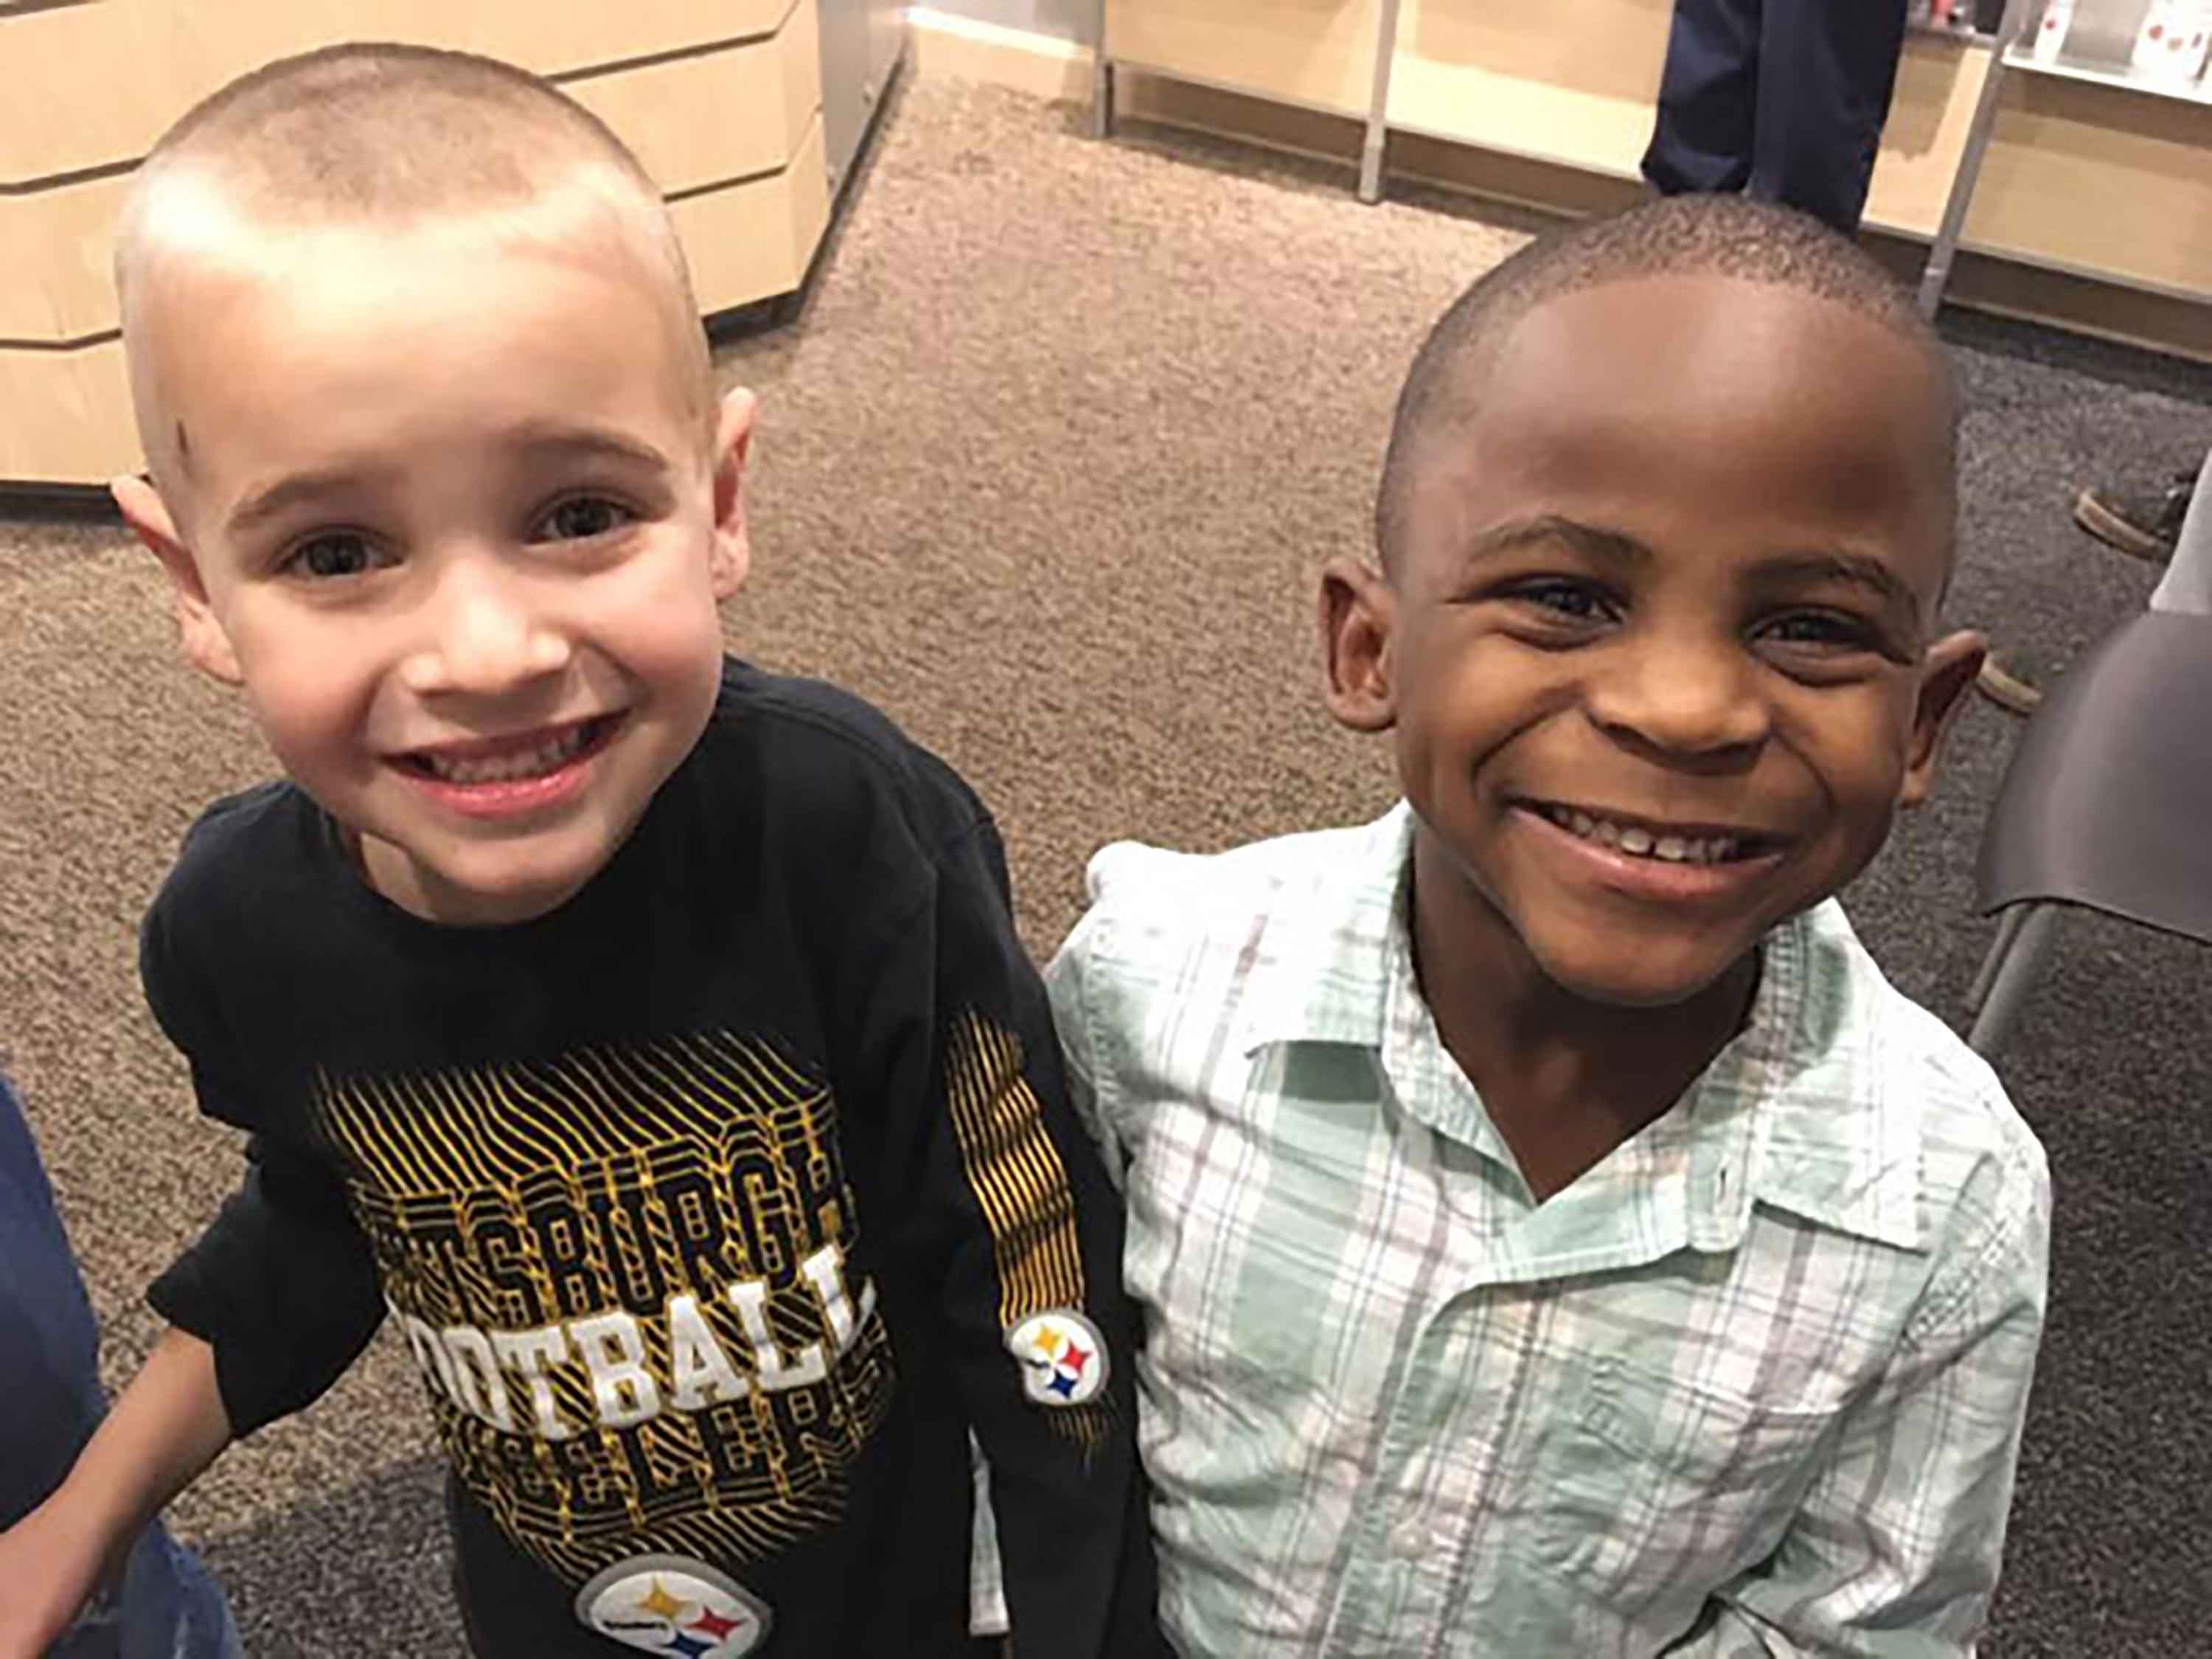 Black and white friends try to trick teacher with matching haircuts | CNN